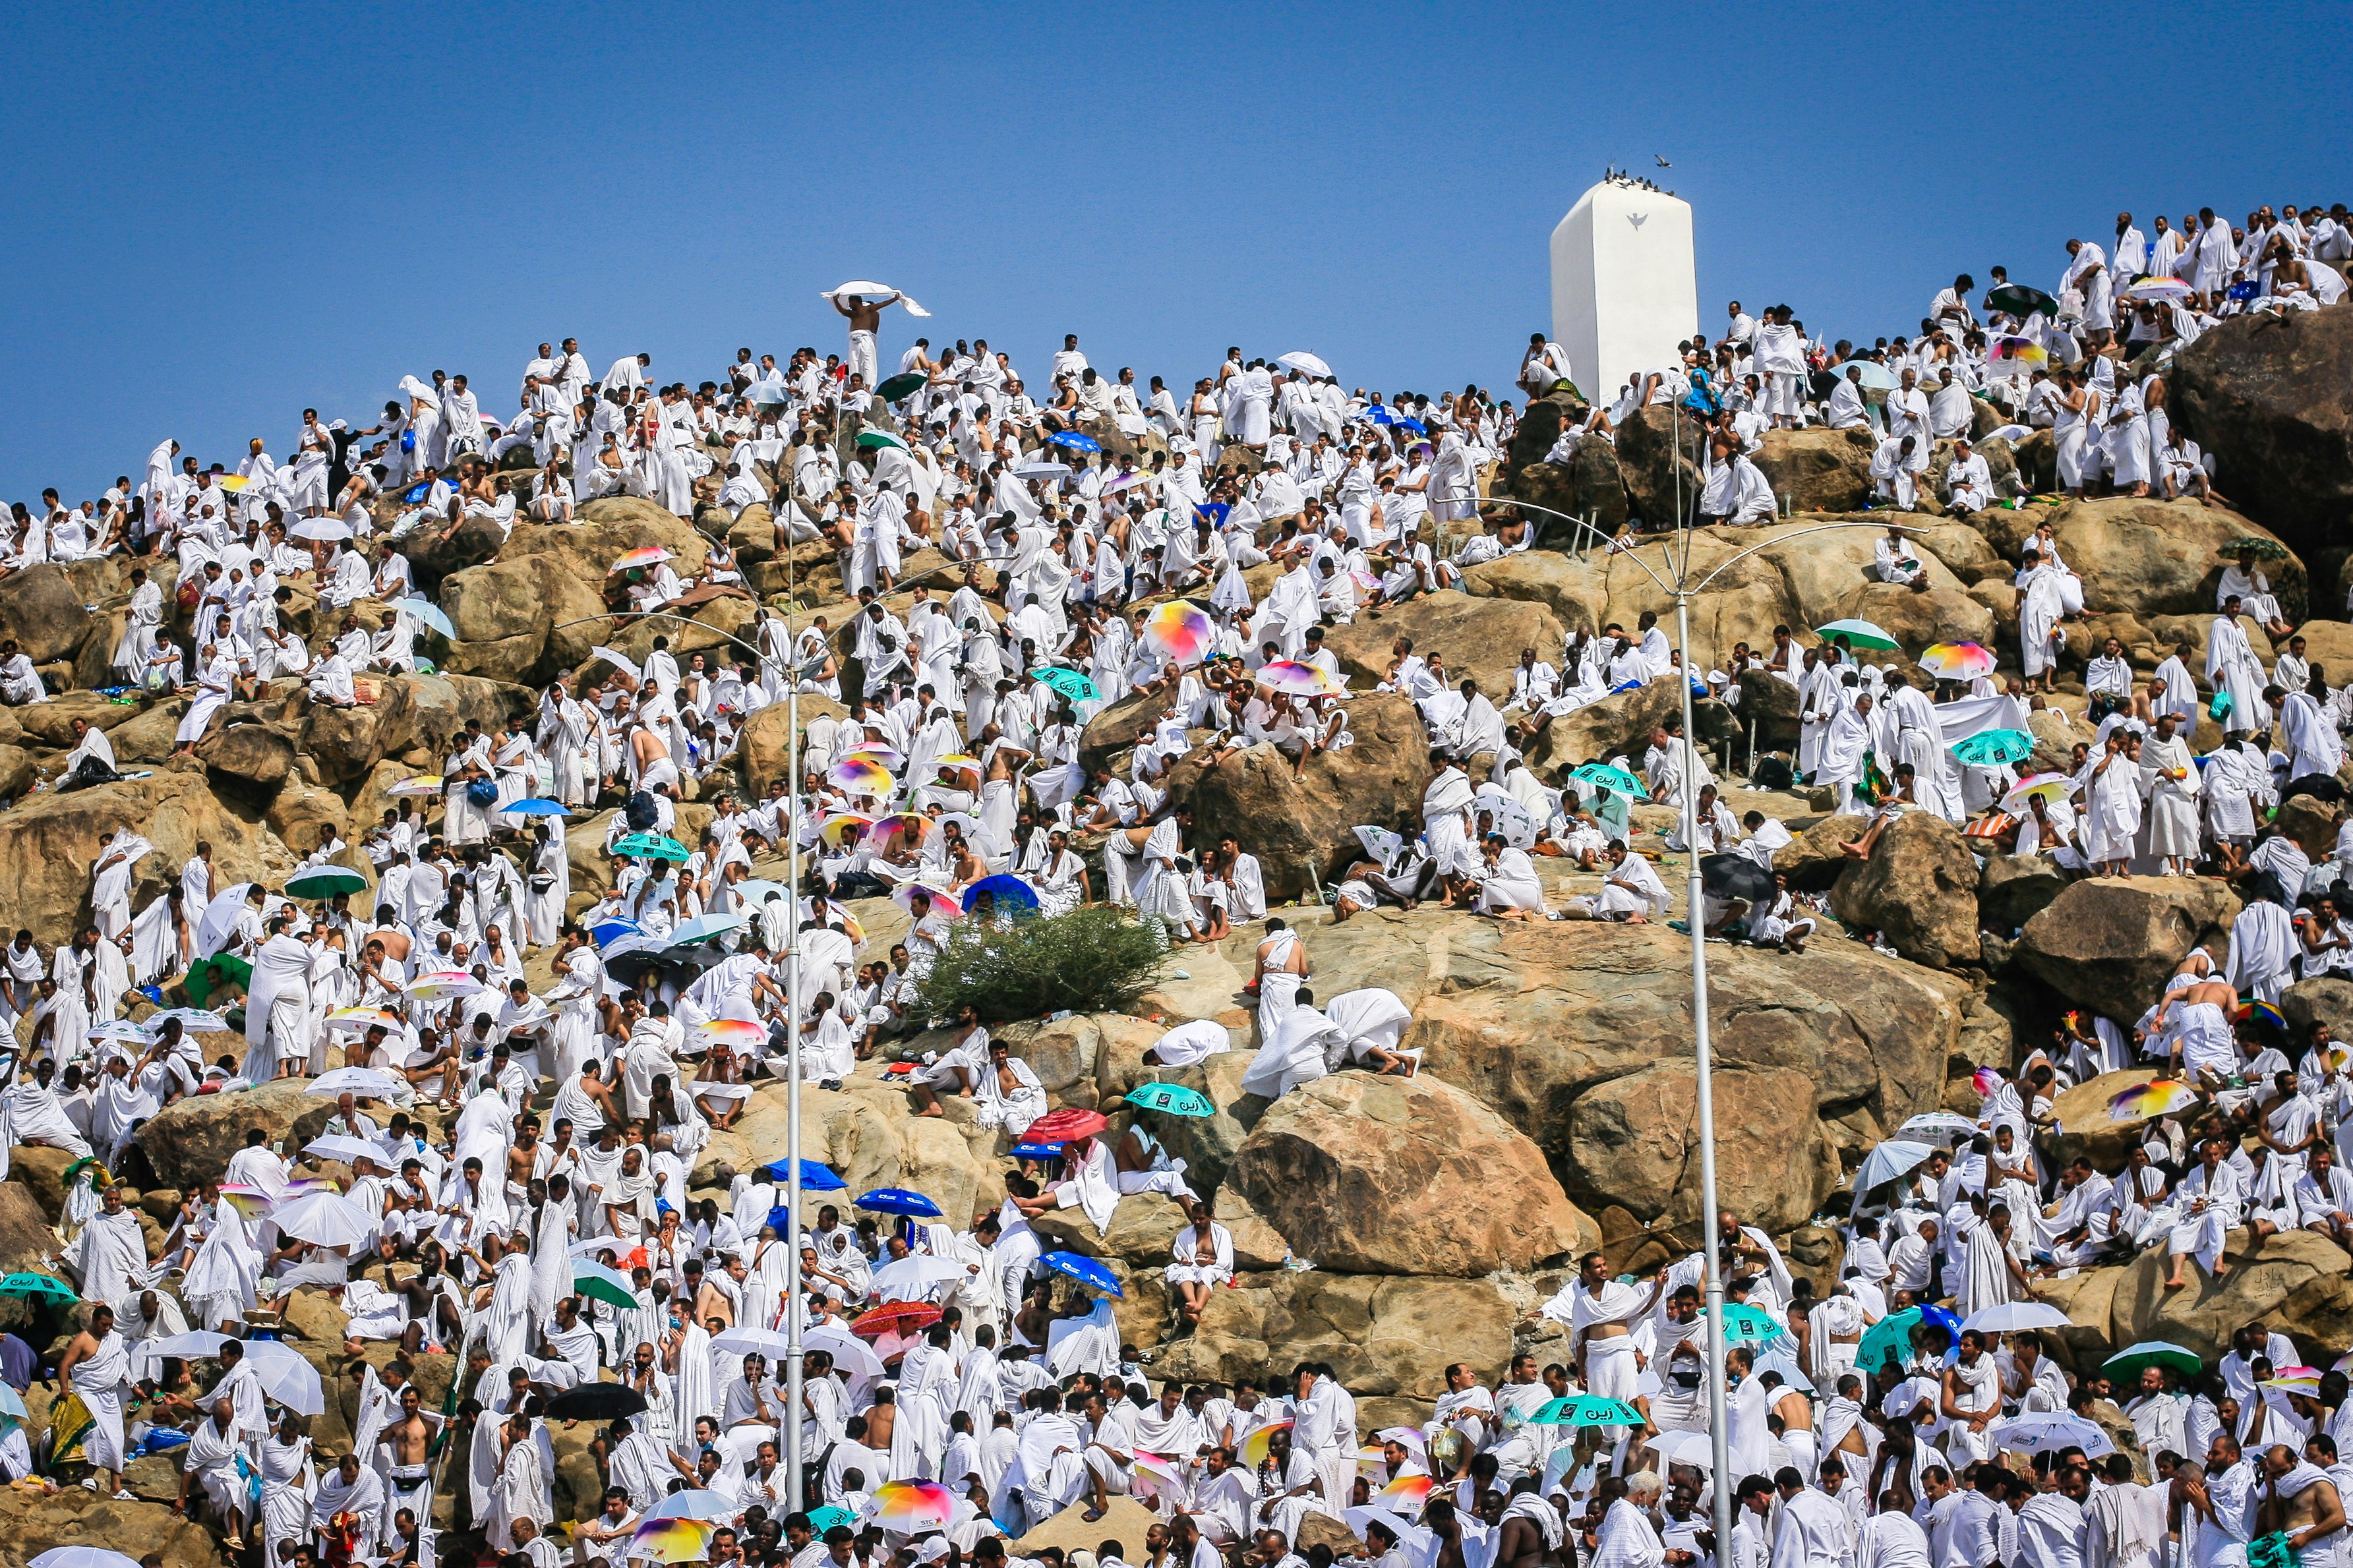 Muslims gather atop the mountain during the Day of Arafat as part of the rites of the Hajj Pilgrimage to Saudi Arabia